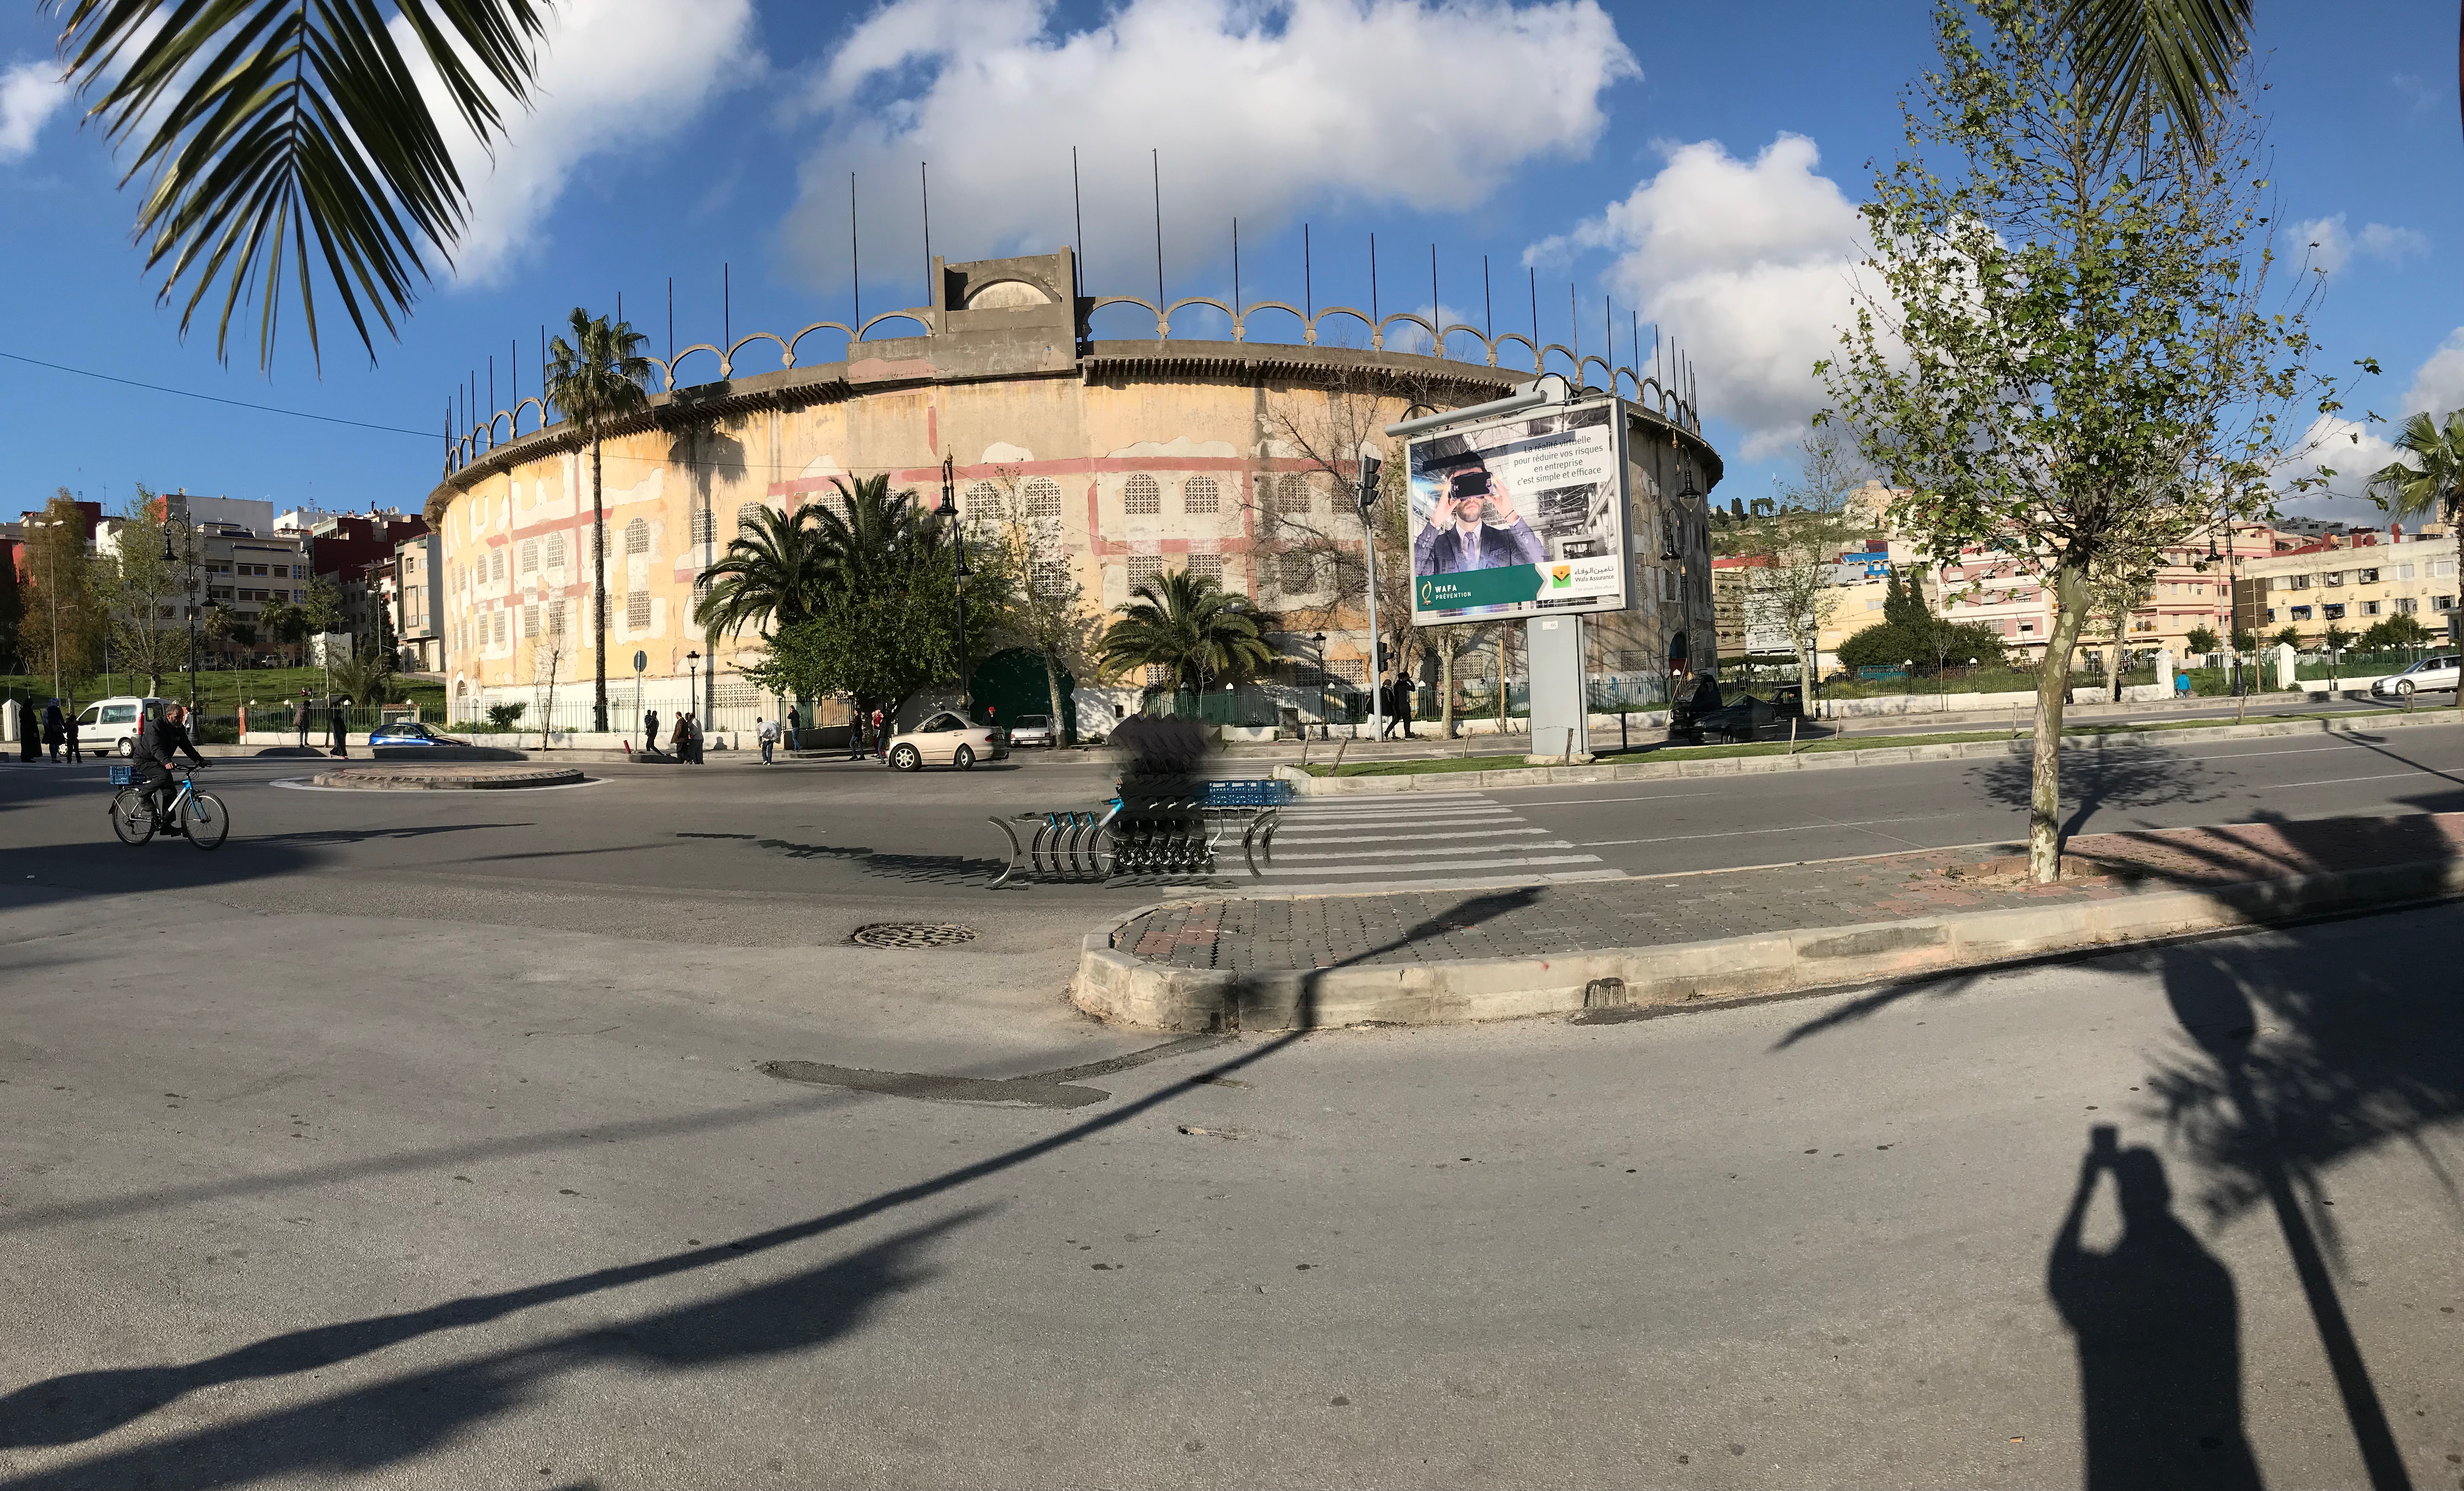 <p>In situ view from across Rte de Tetouan with cyclist and billboard</p>